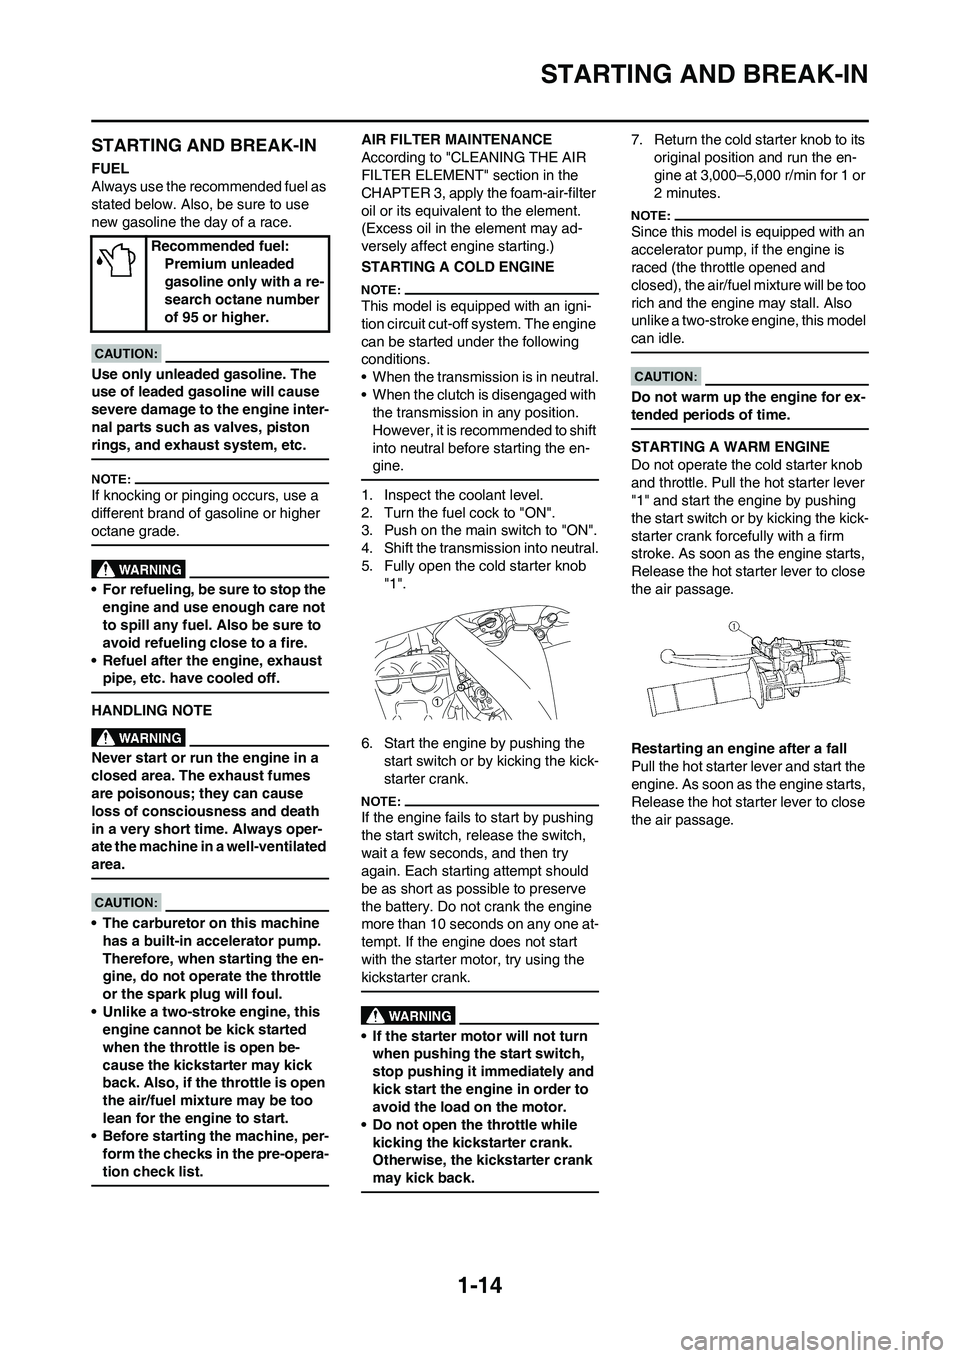 YAMAHA WR 450F 2008  Owners Manual 1-14
STARTING AND BREAK-IN
STARTING AND BREAK-IN
FUEL
Always use the recommended fuel as 
stated below. Also, be sure to use 
new gasoline the day of a race.
Use only unleaded gasoline. The 
use of le